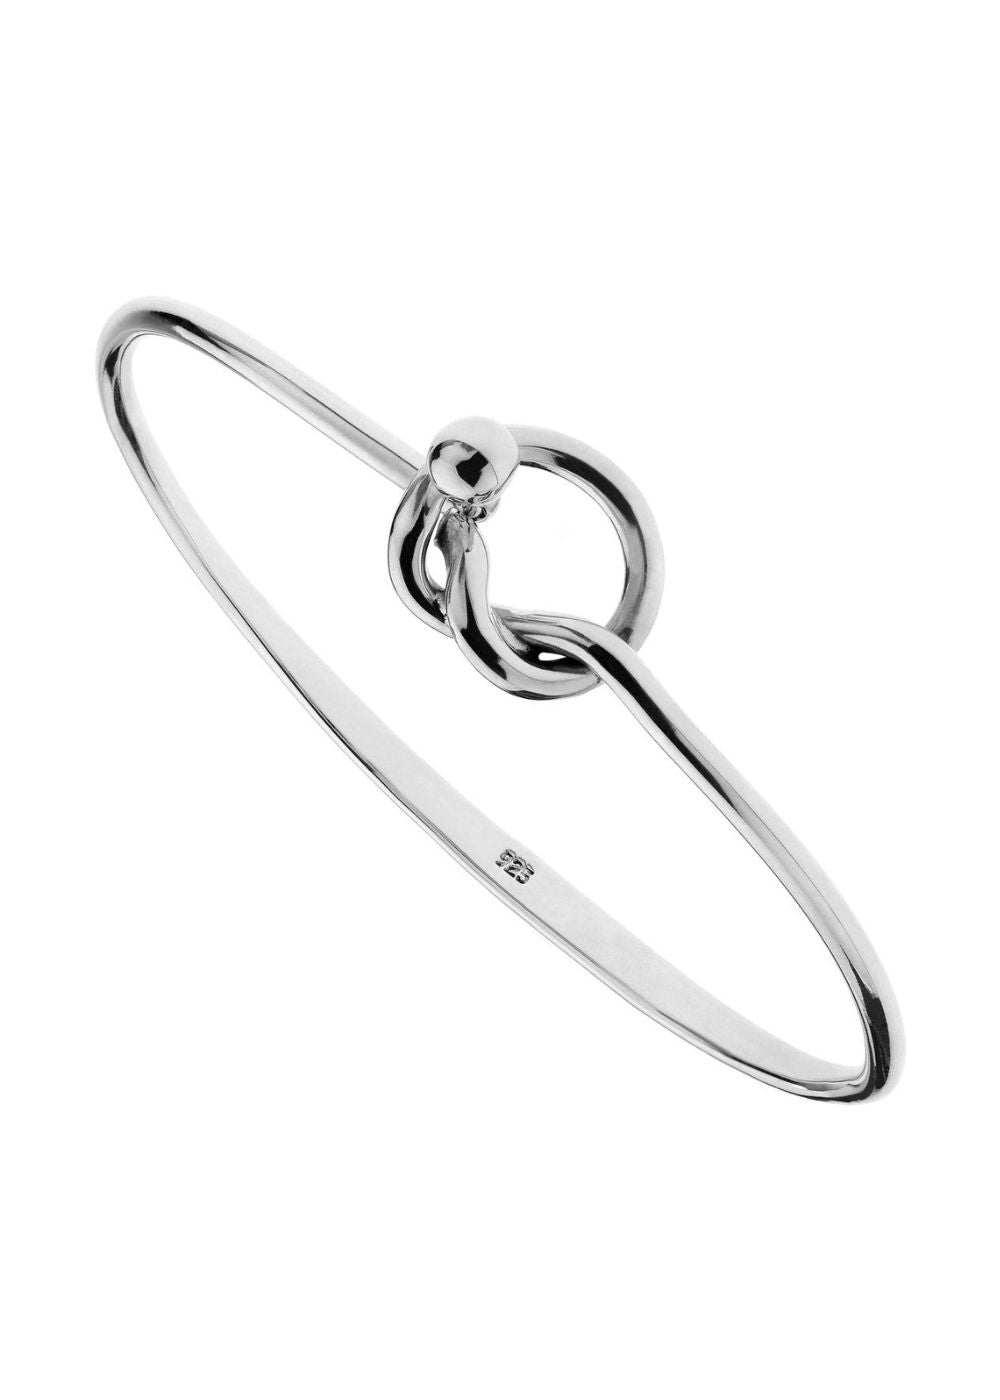 You're My Love Knot Bangle